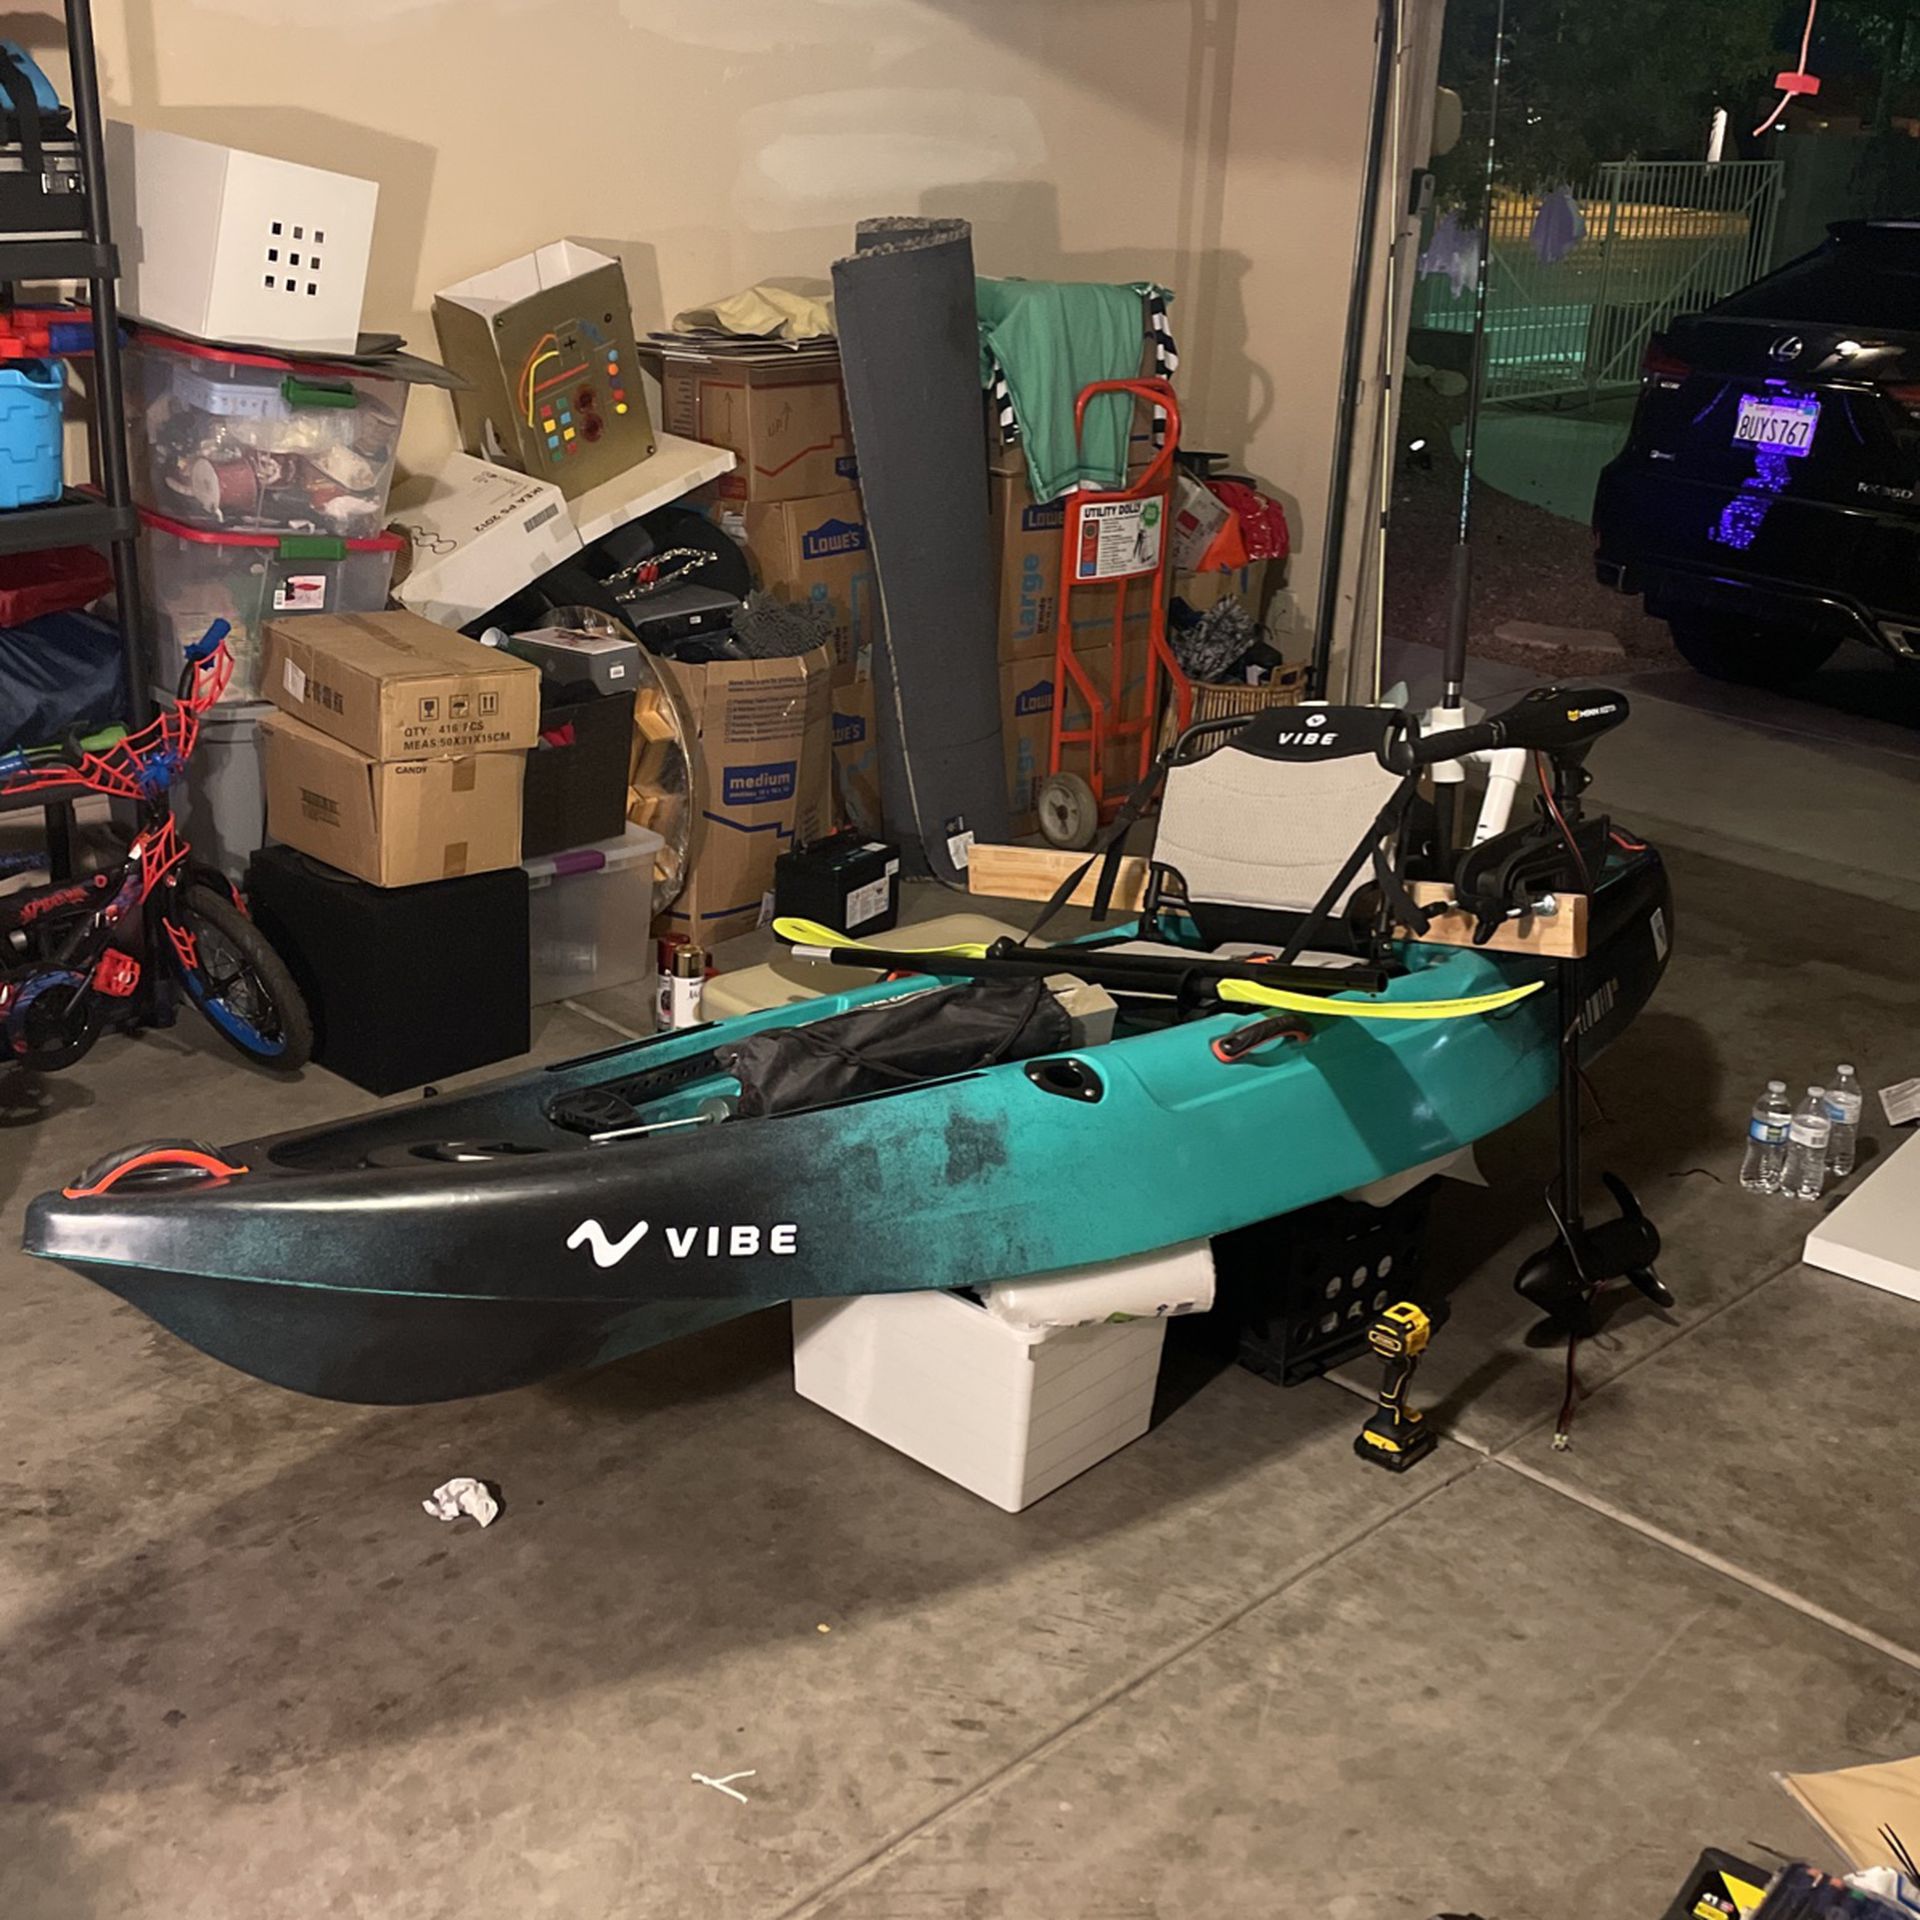 New Vibe Fishing Kayak With Motor Fully Loaded.